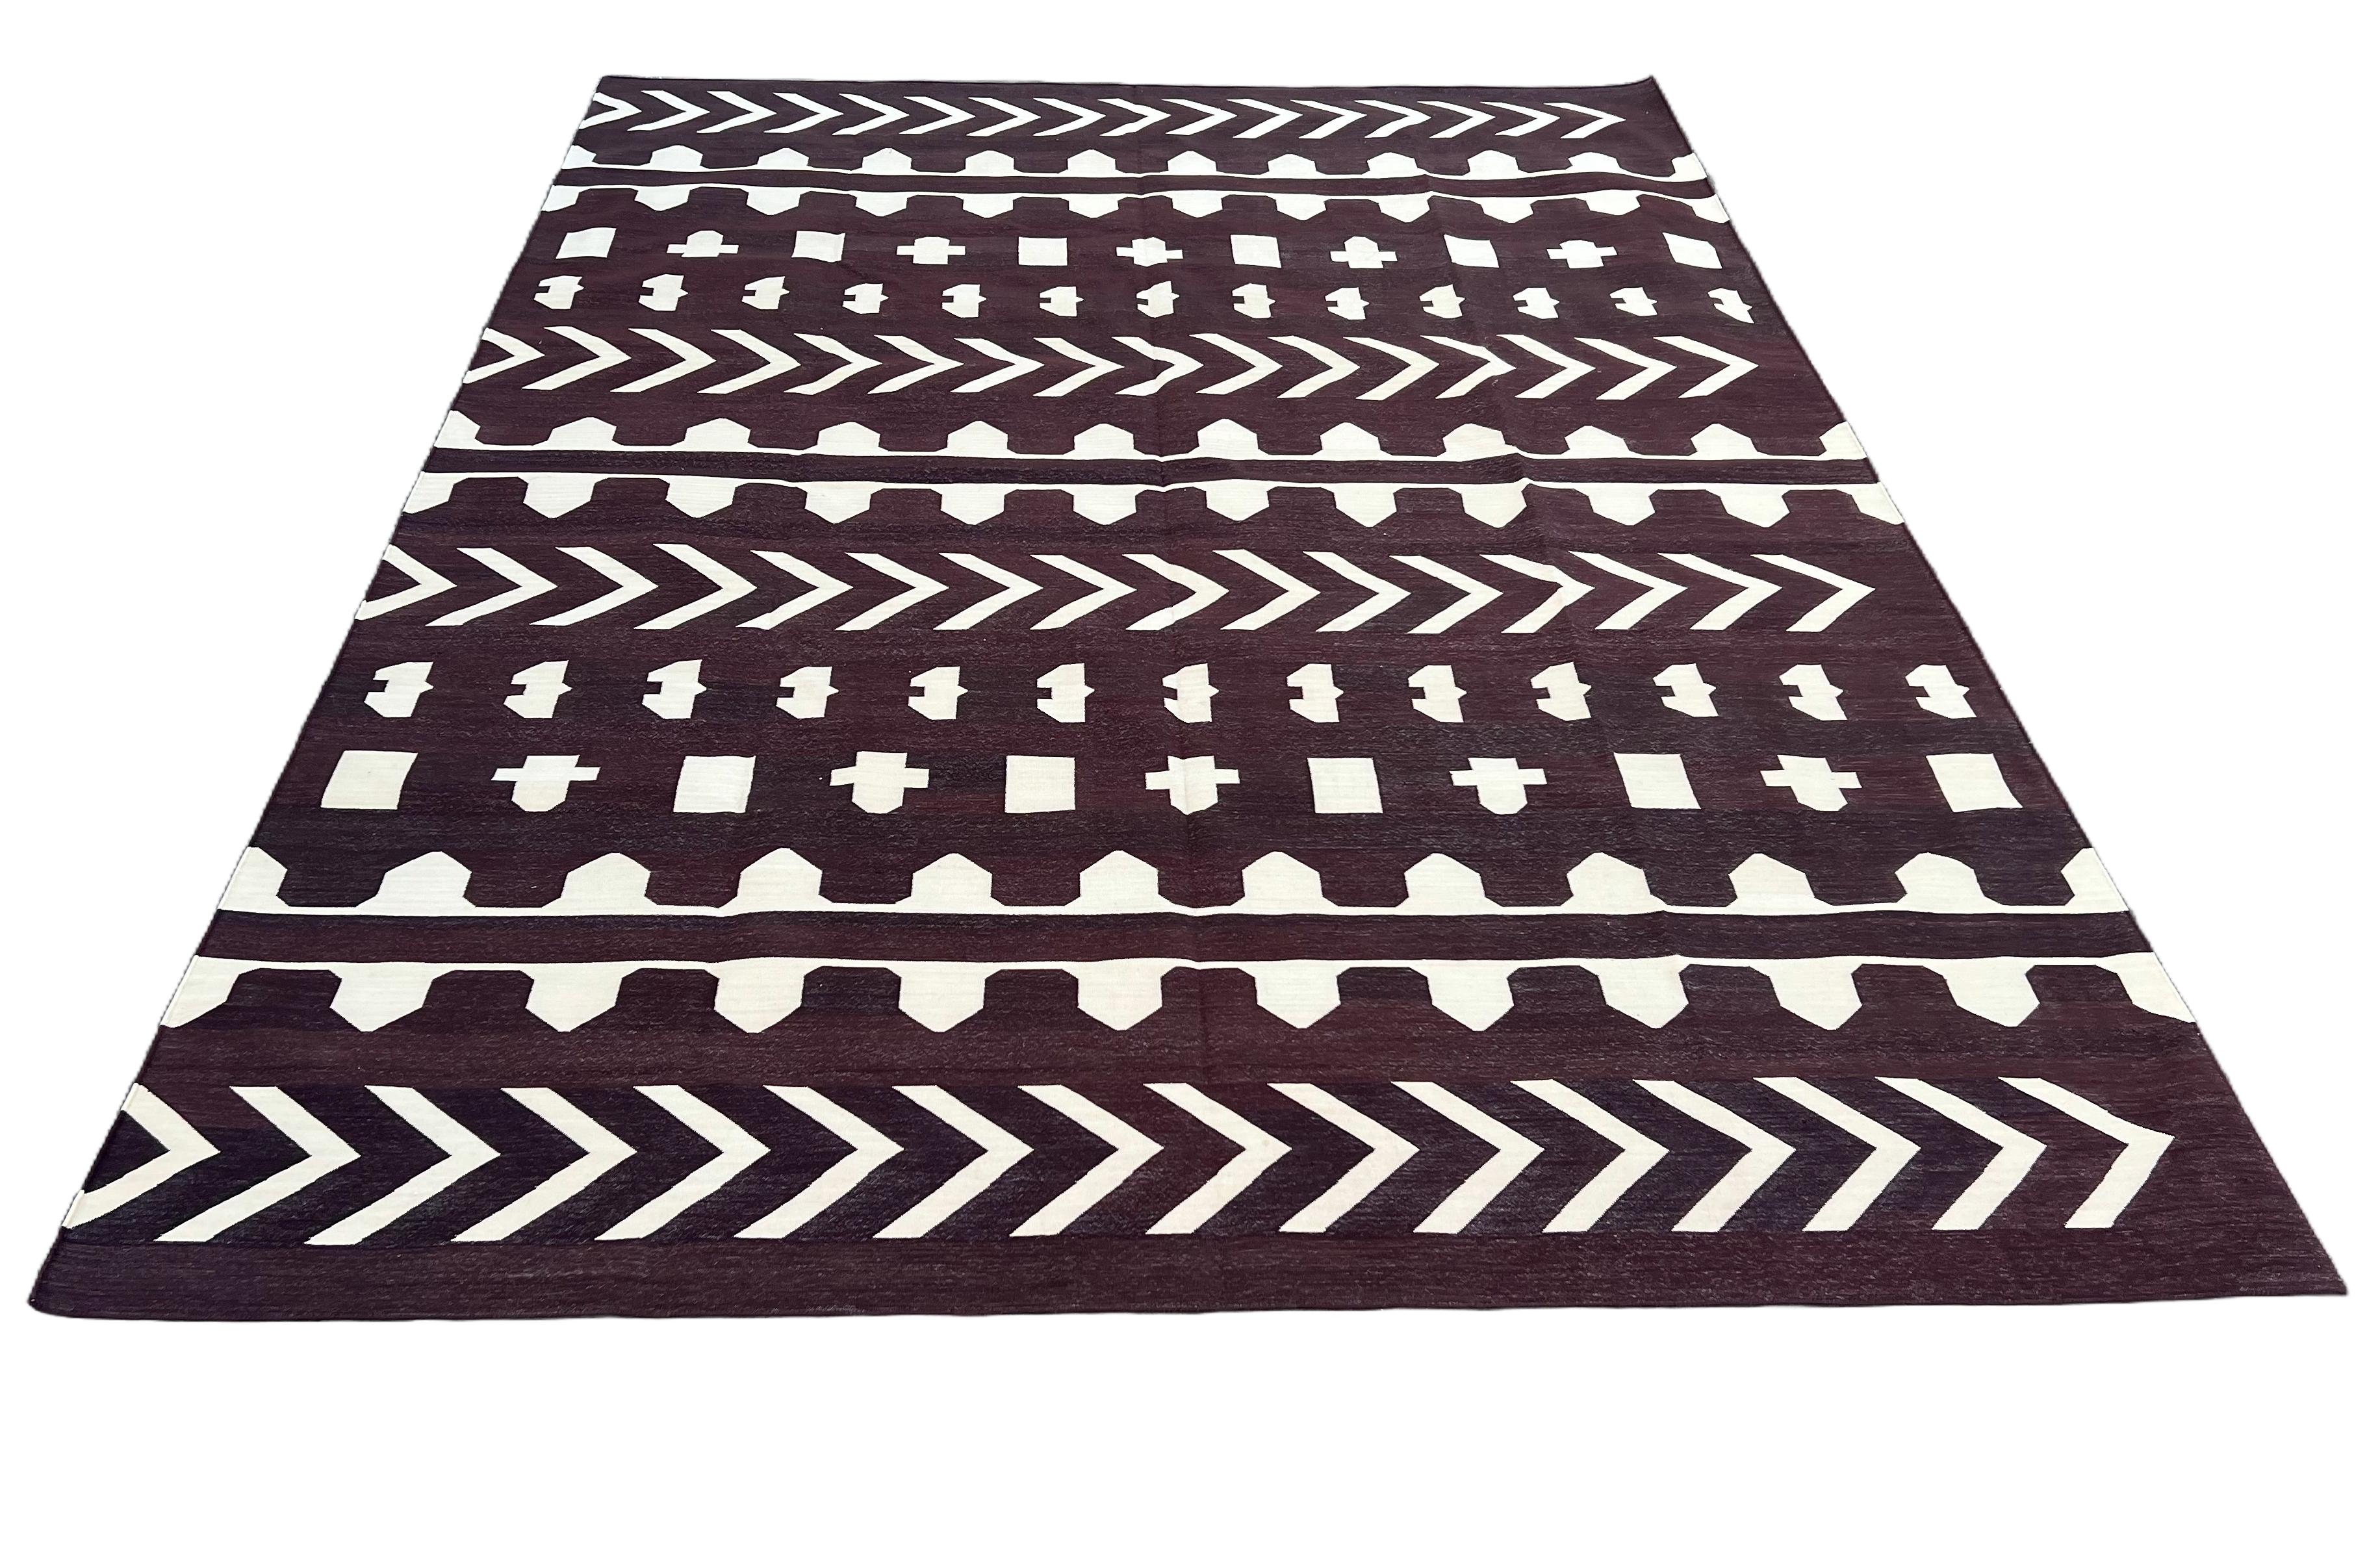 Hand-Woven Handmade Cotton Area Flat Weave Rug, Brown & Cream Geometric Tile Indian Dhurrie For Sale